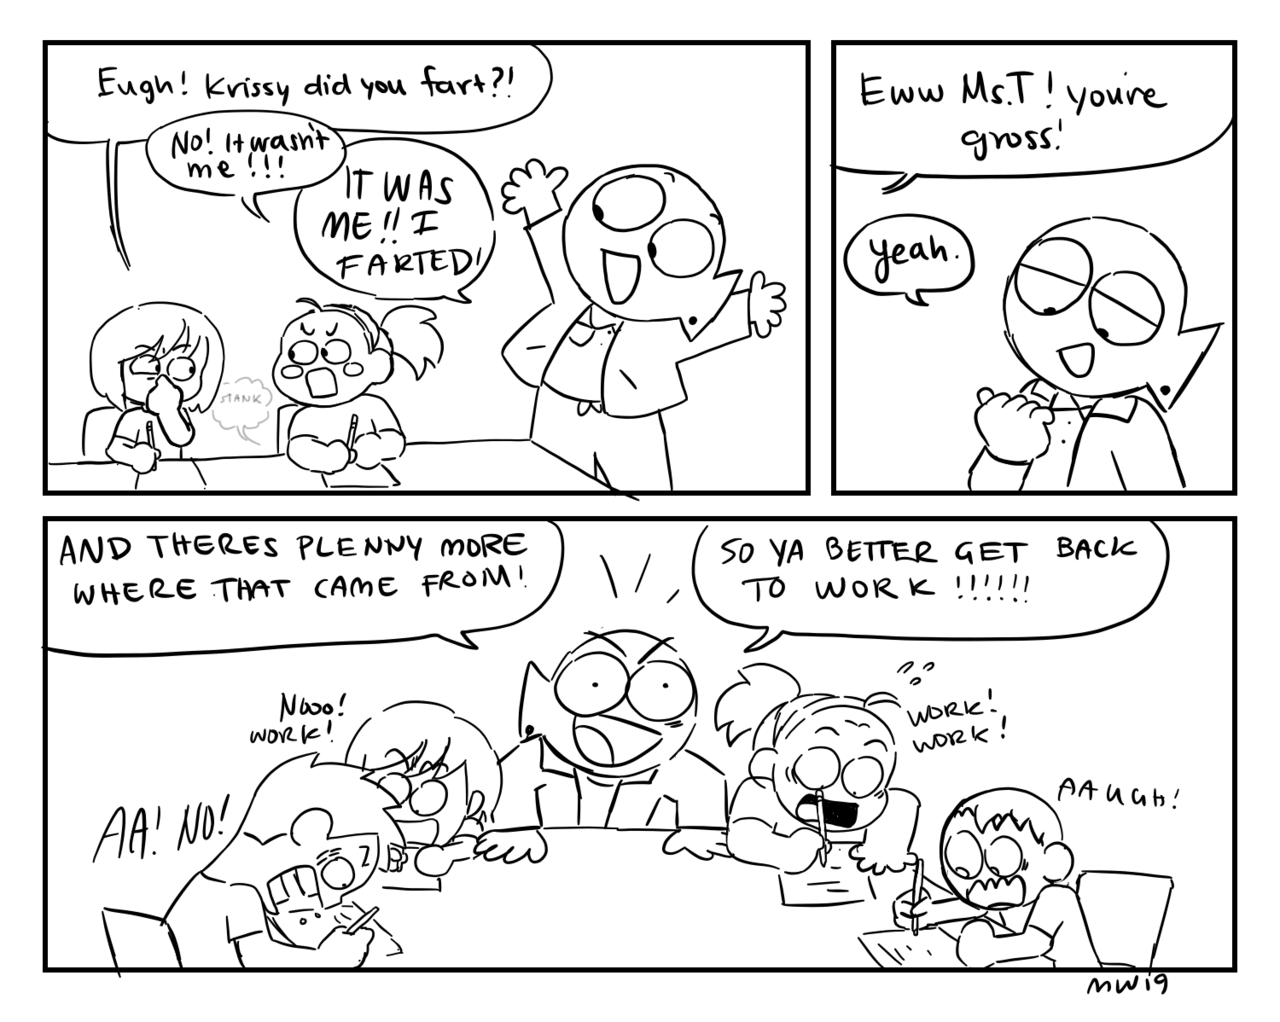 last comic got a lot of fellow gays feeling rly defeated&hellip;the tags made